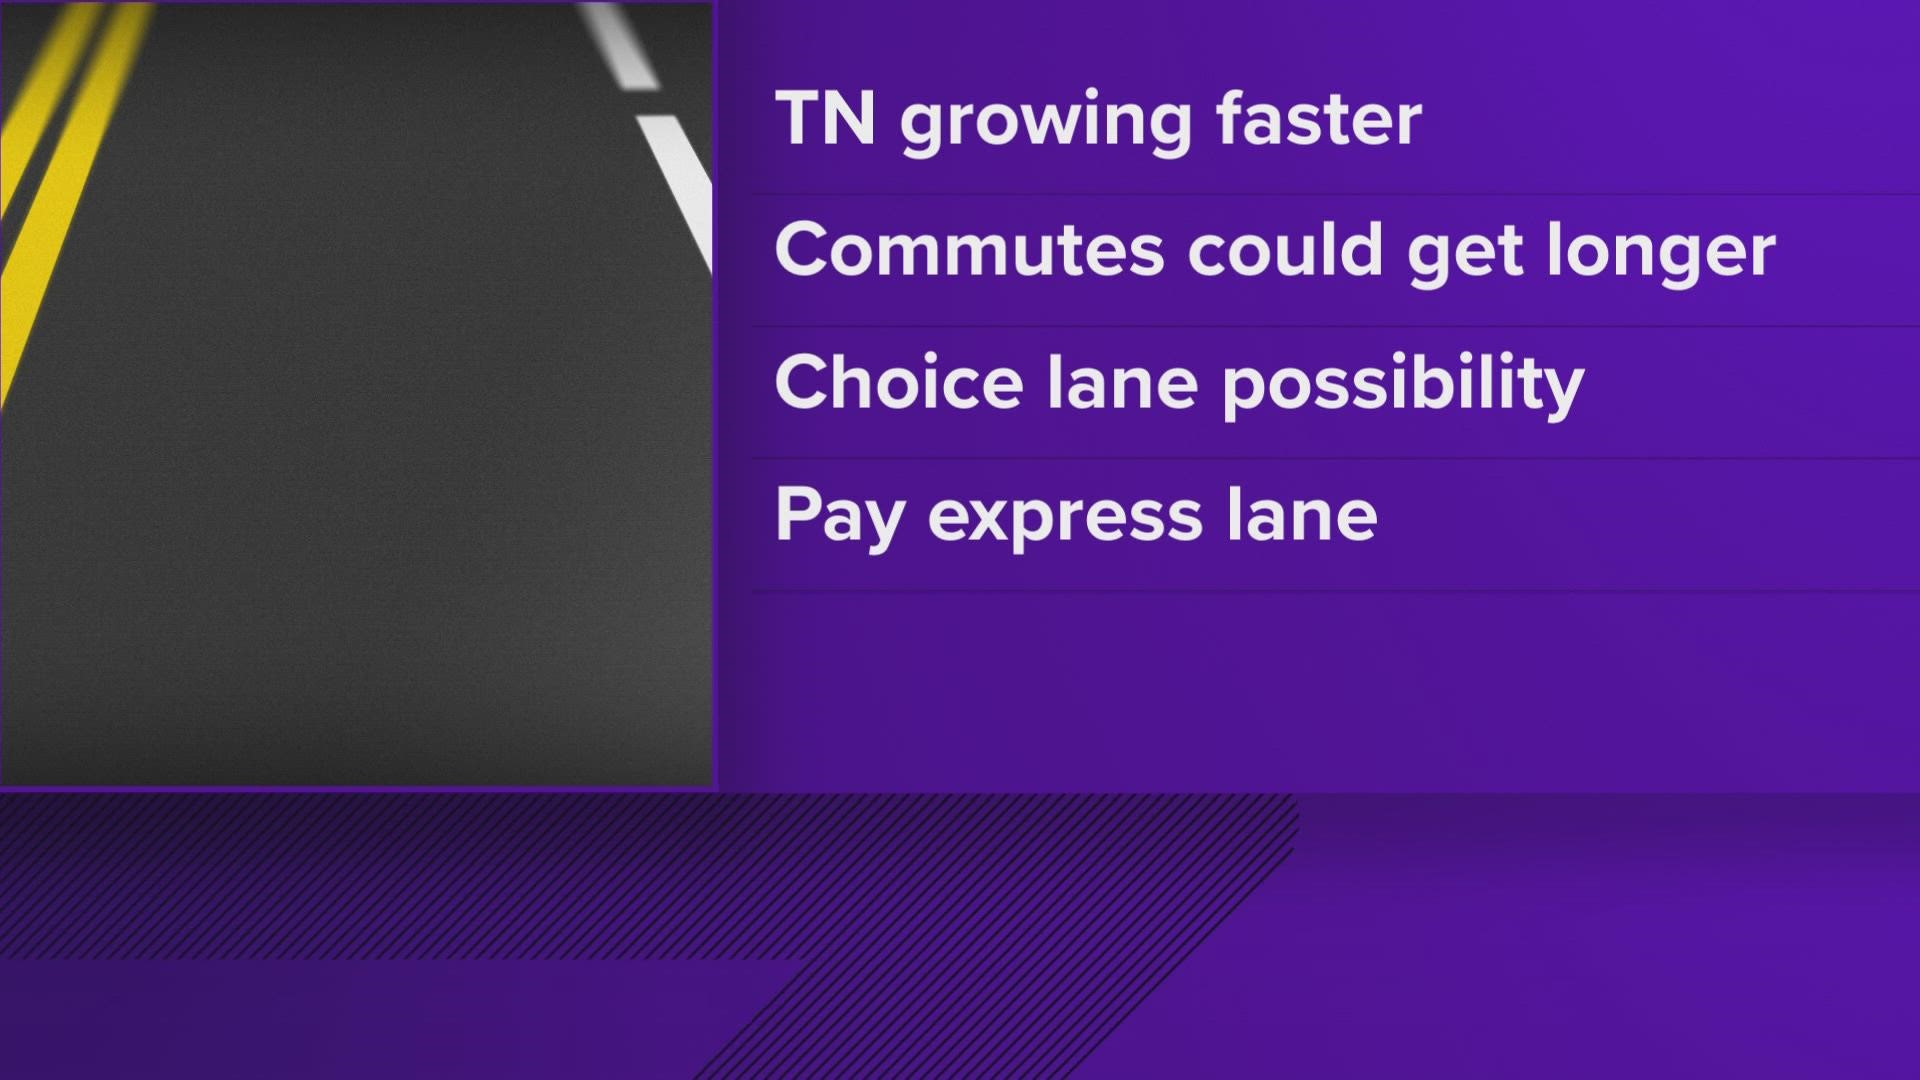 TDOT also said that it aims to reduce the number of years it takes to complete projects from 15 years to five years.